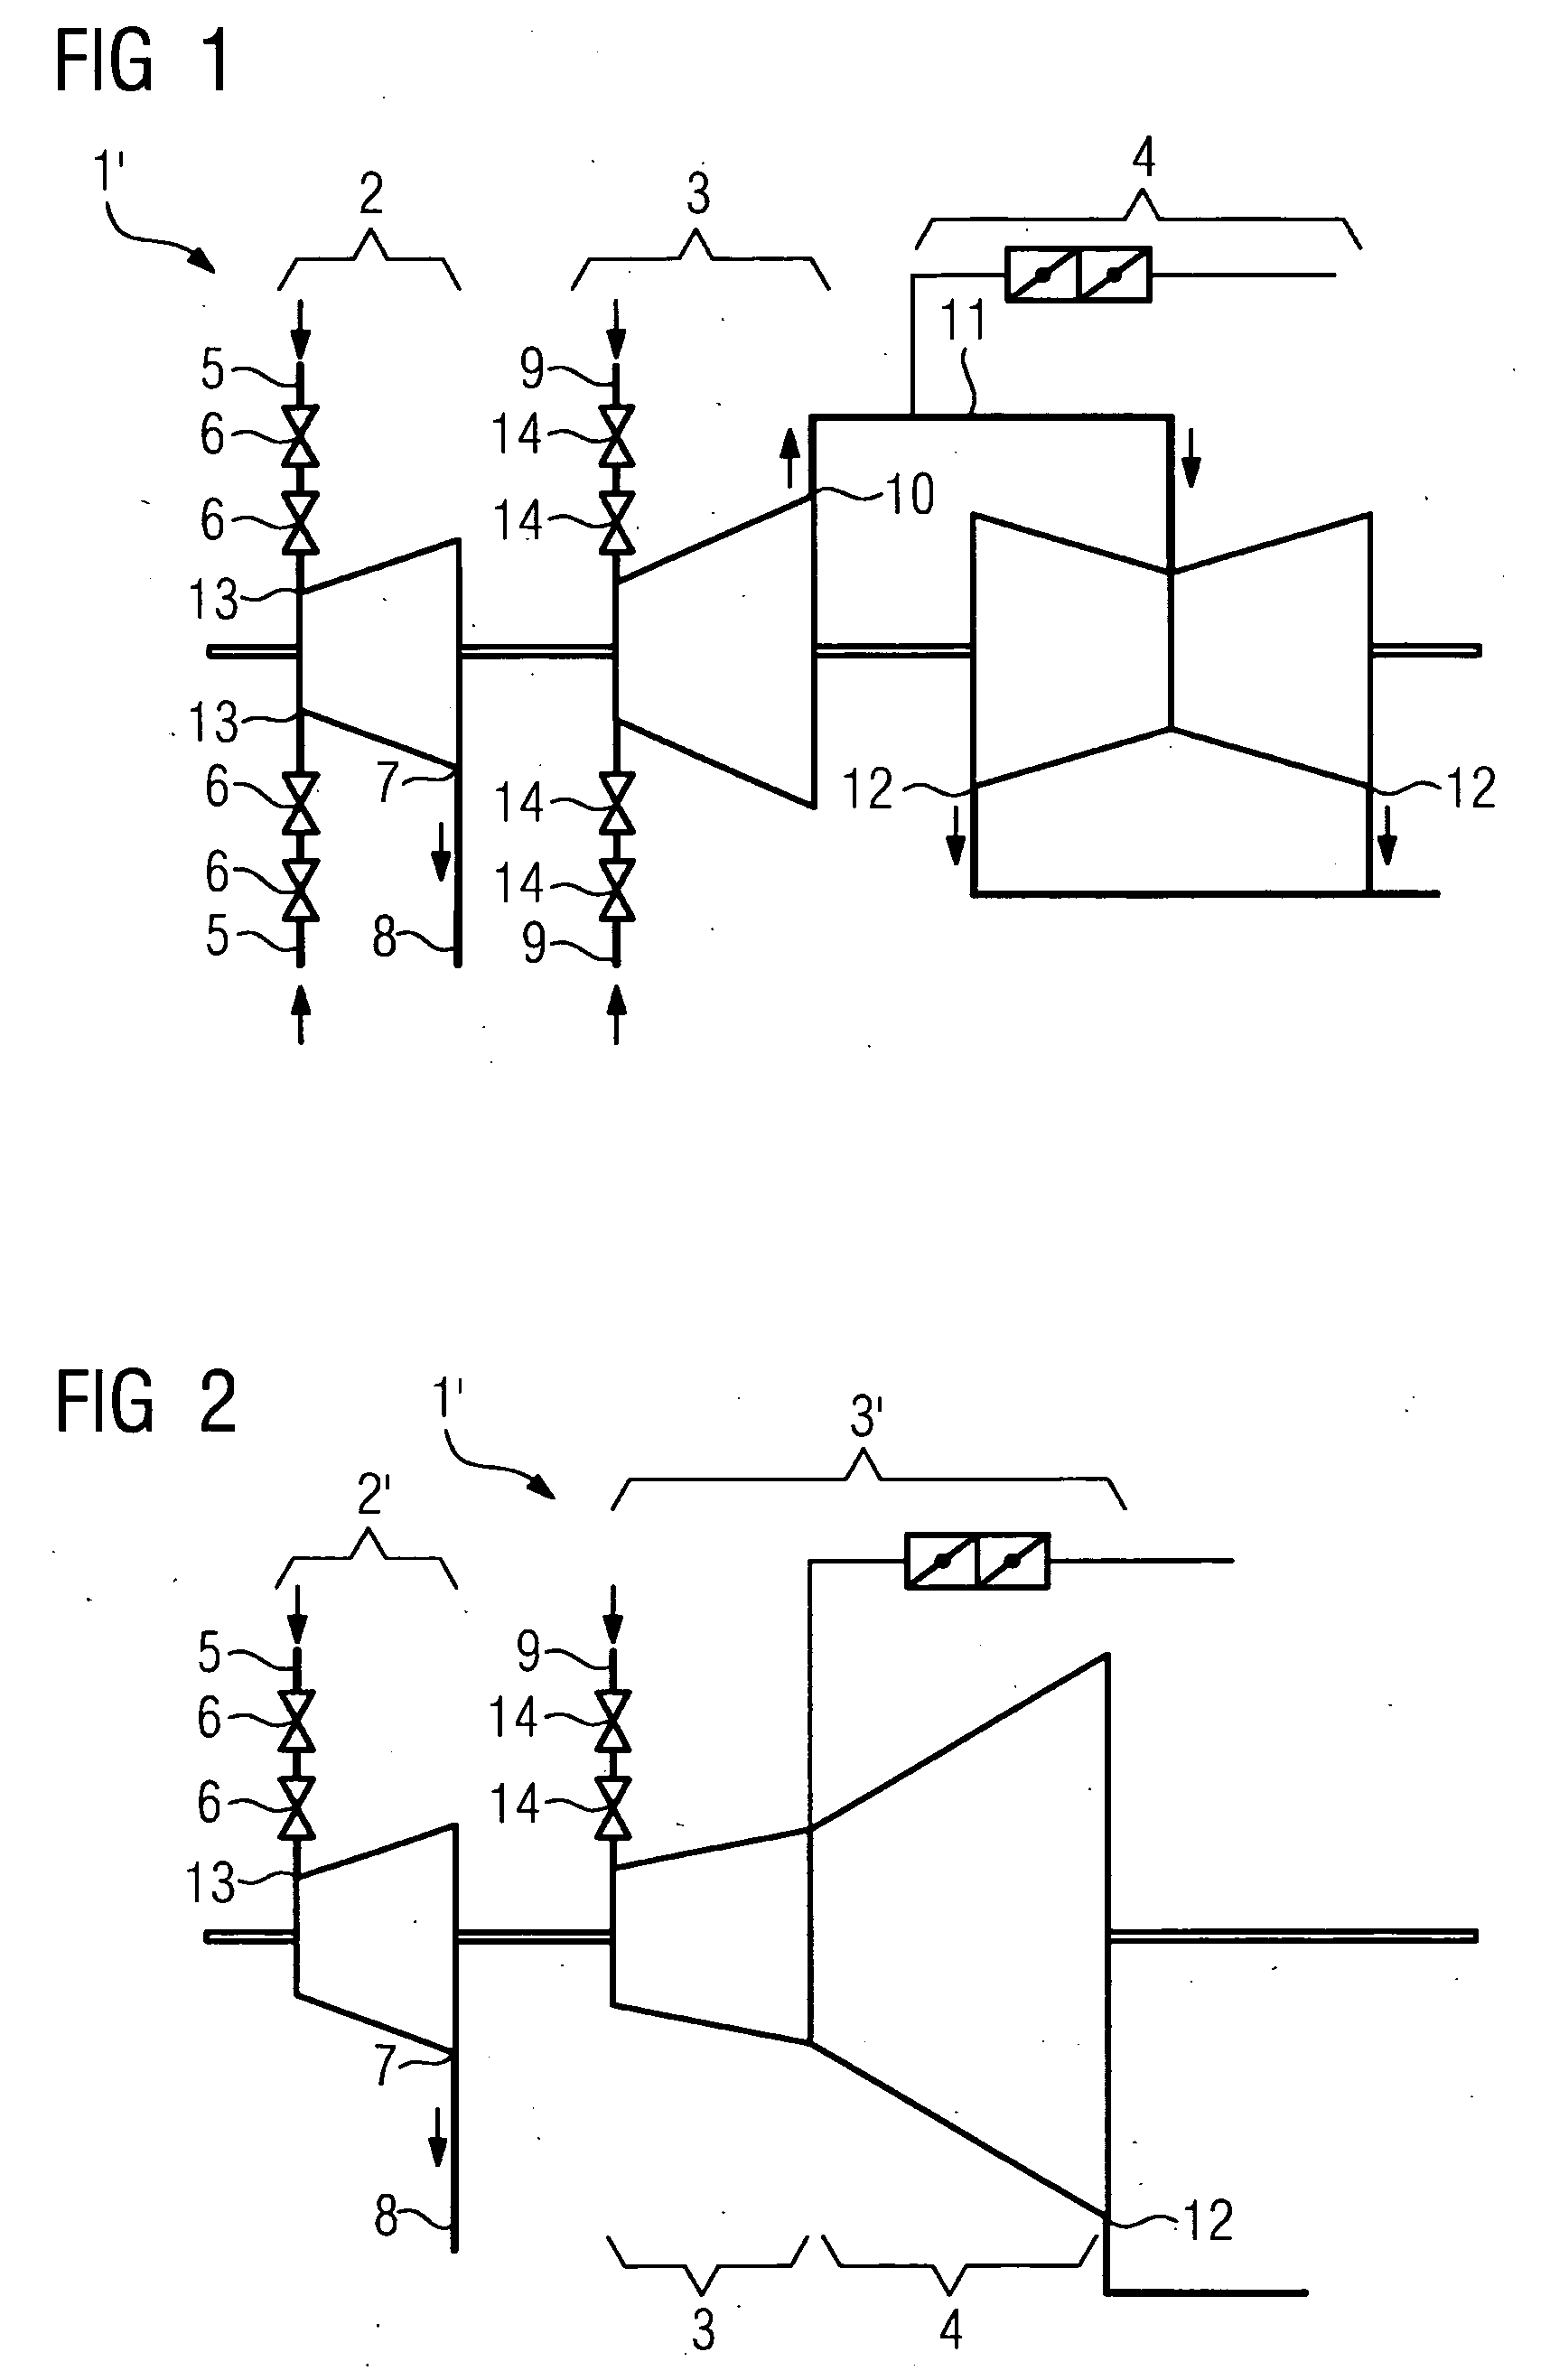 Method for Warming-Up a Steam Turbine